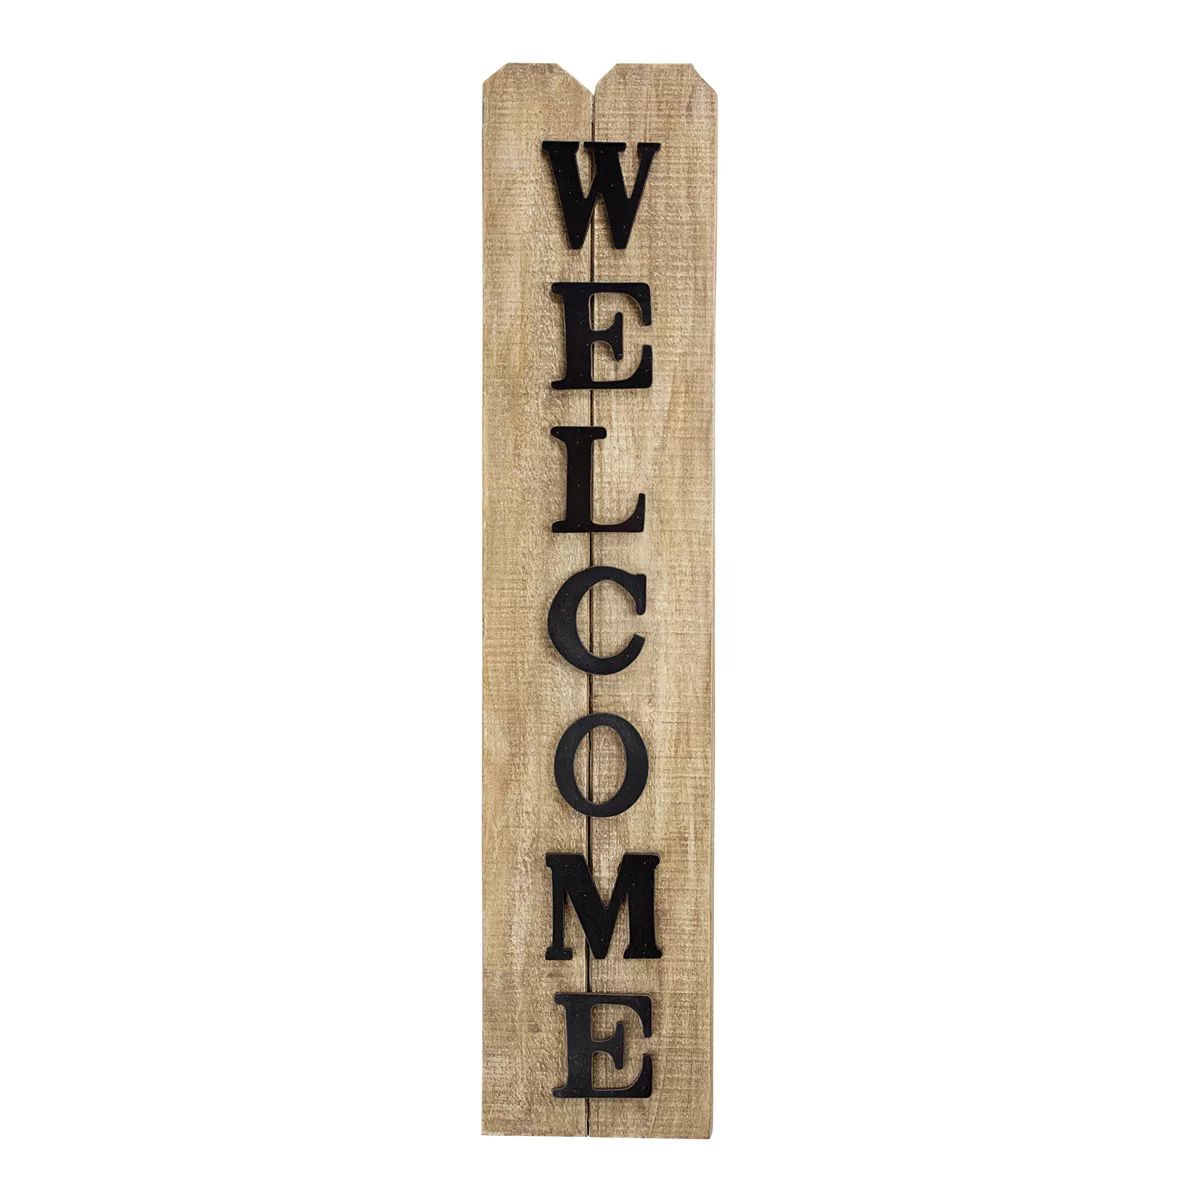 American Art Décor Rustic Welcome Sign Wall Decor | Kohl's